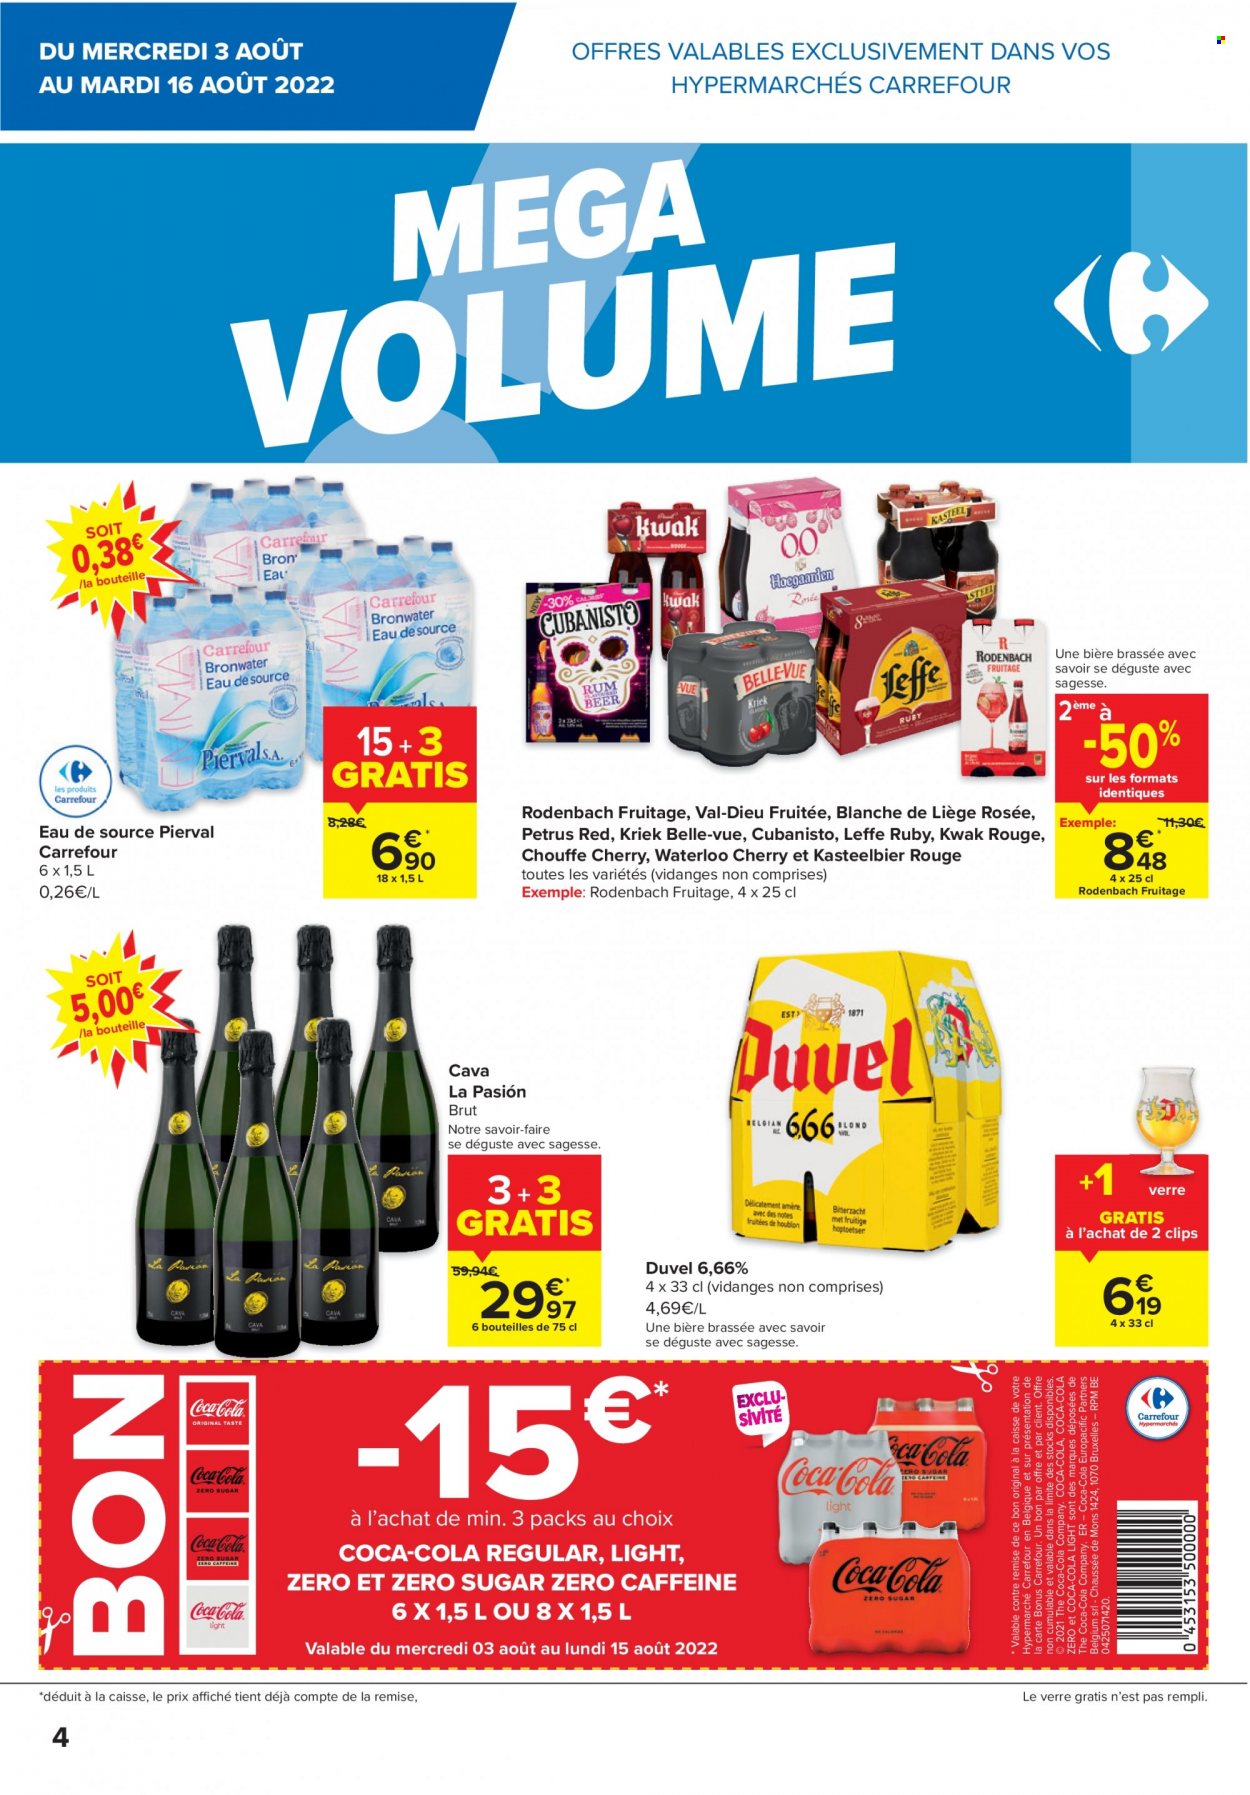 Catalogue Carrefour hypermarkt - 3.8.2022 - 16.8.2022. Page 4.